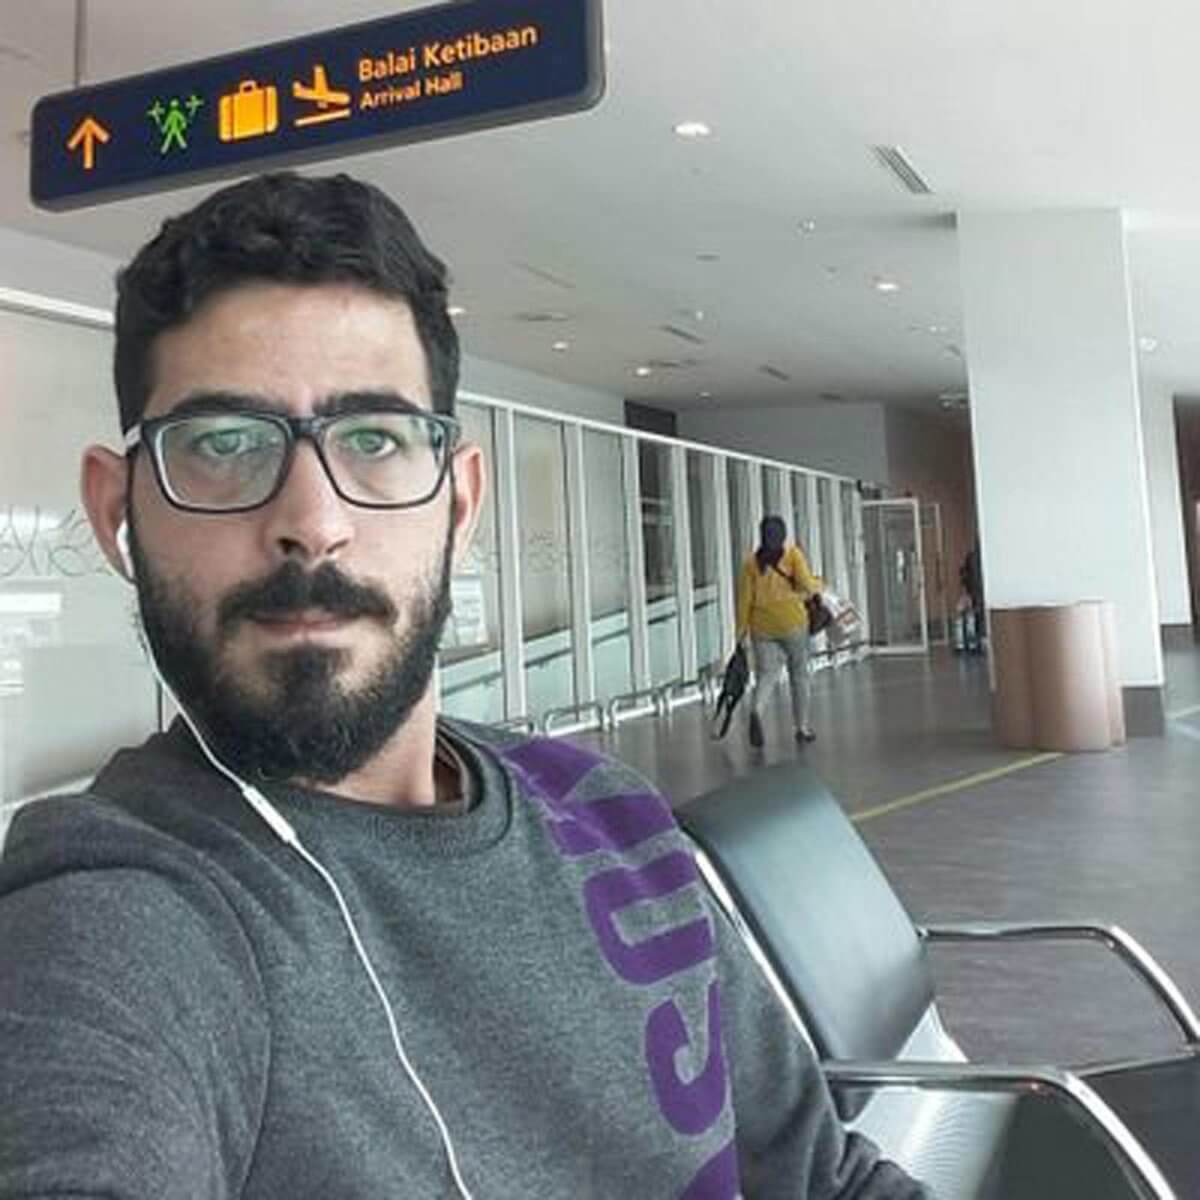 Syrian Refugee Stranded In Malaysian Airport Welcomed By Canadian